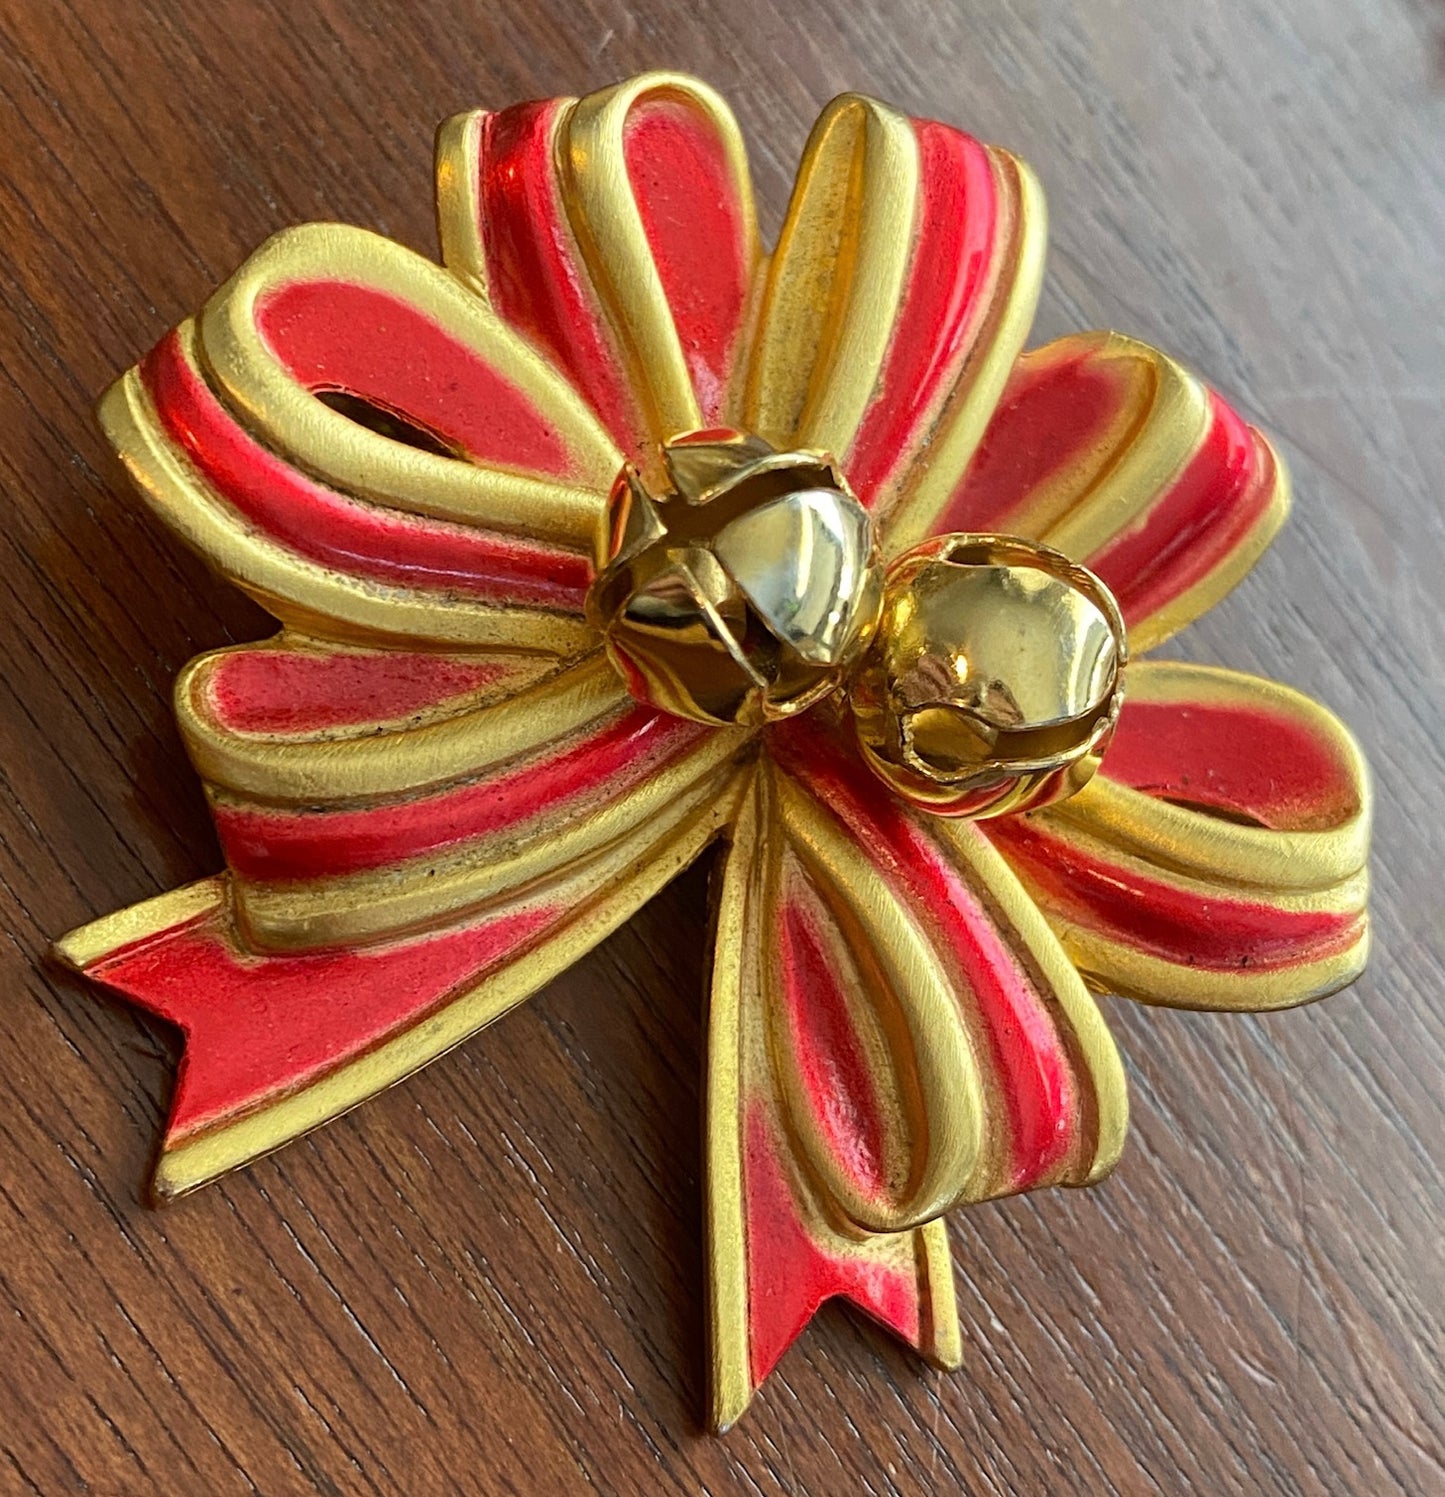 Large Vintage JJ Signed Red Gold Tone Ribbon Bow Brooch Pin with Bells